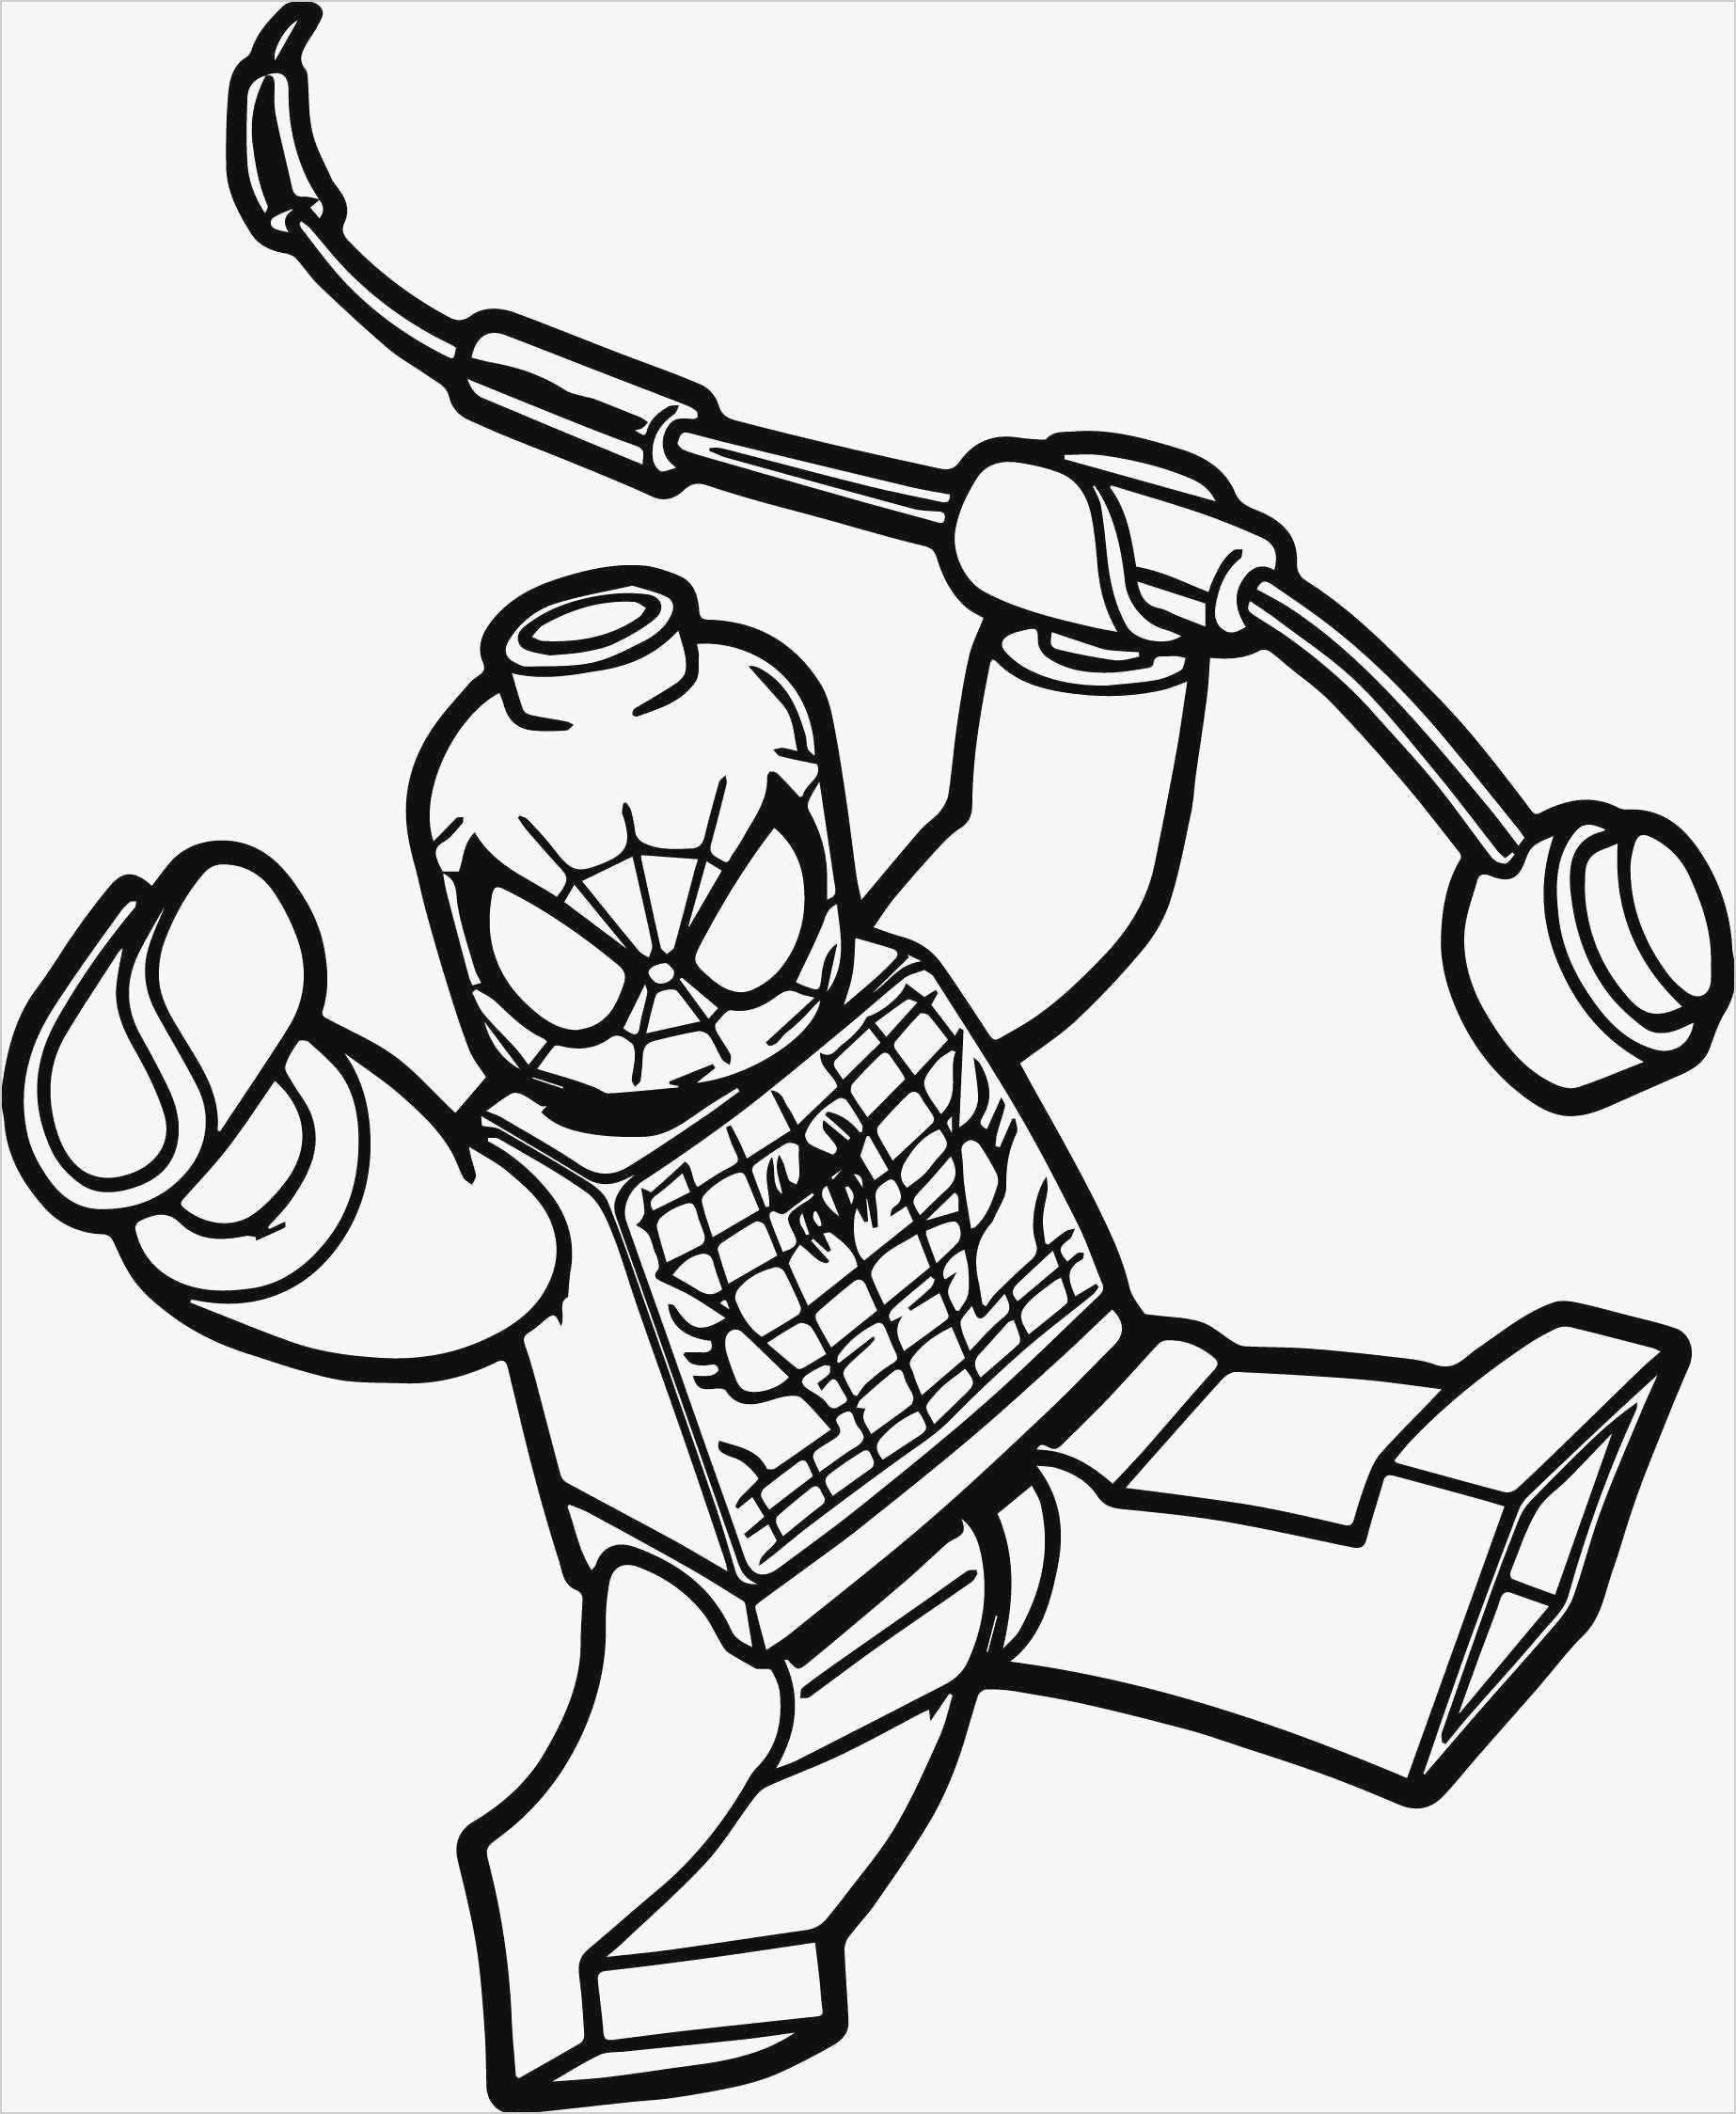 Free Printable Spiderman Coloring Pages Coloring Book The Amazing Spiderman Coloring Pages Vs Lizard